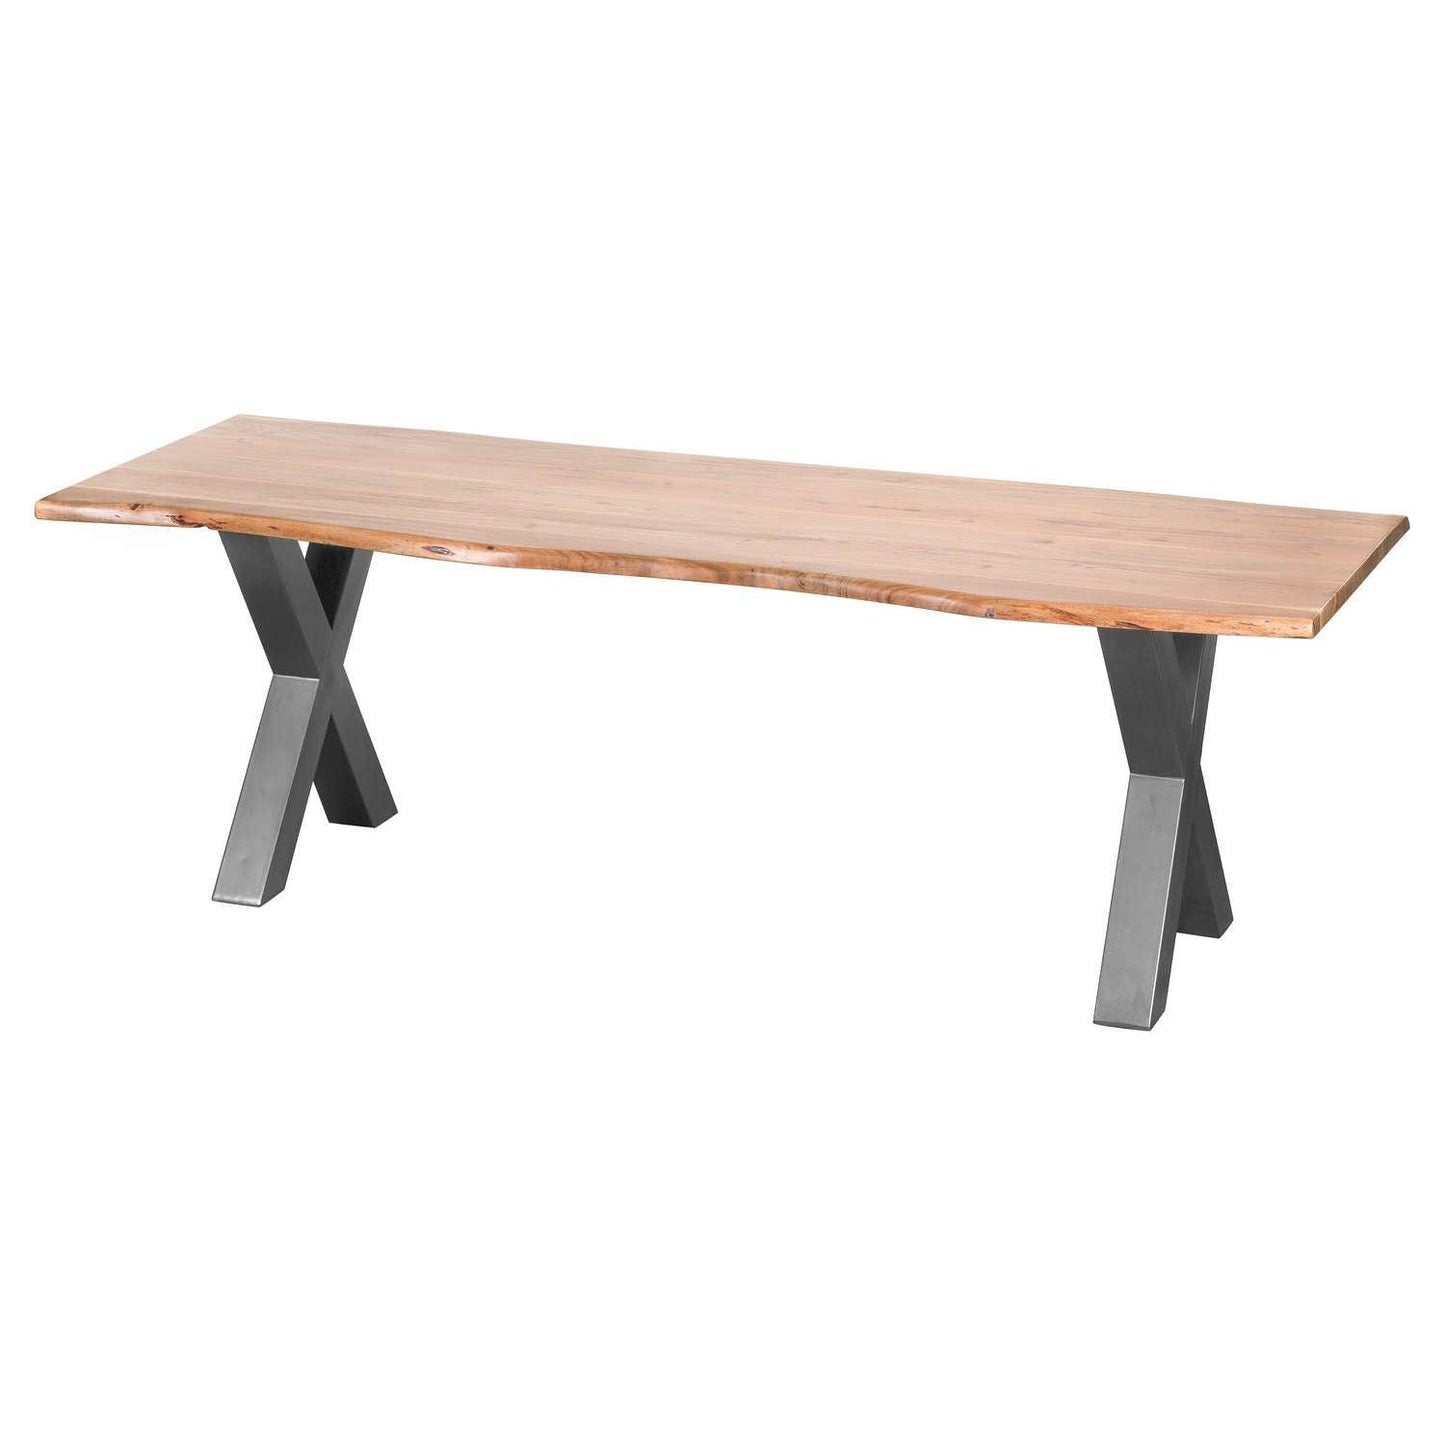 Live Edge Large Dining Table - Abode Decor